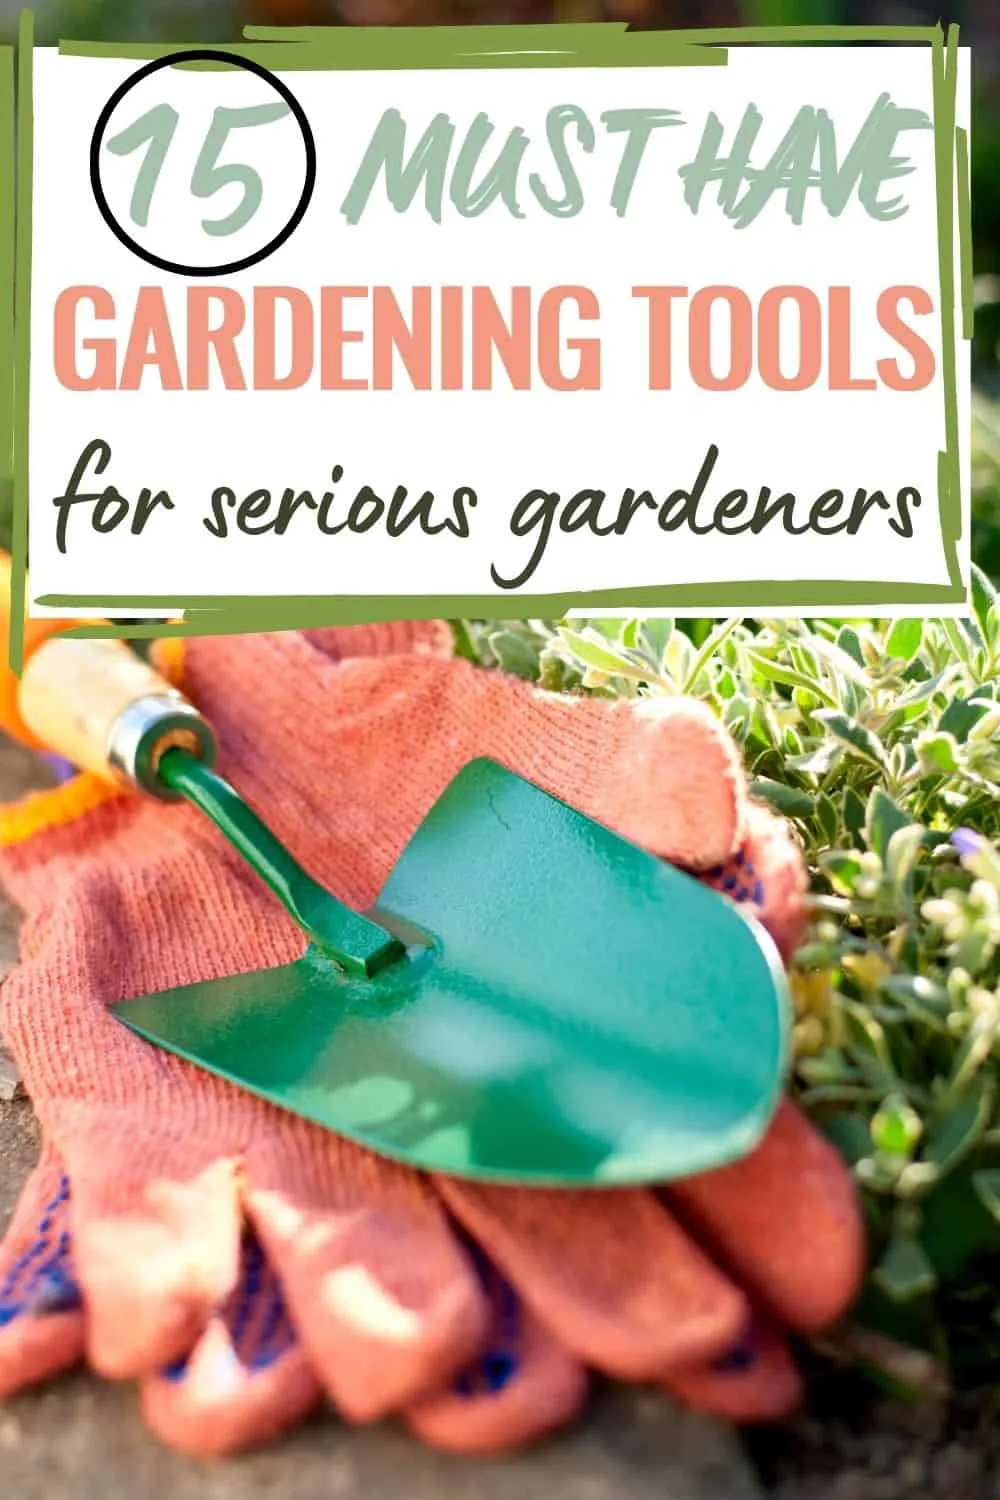 15 must-have best gardening tools for serious gardeners